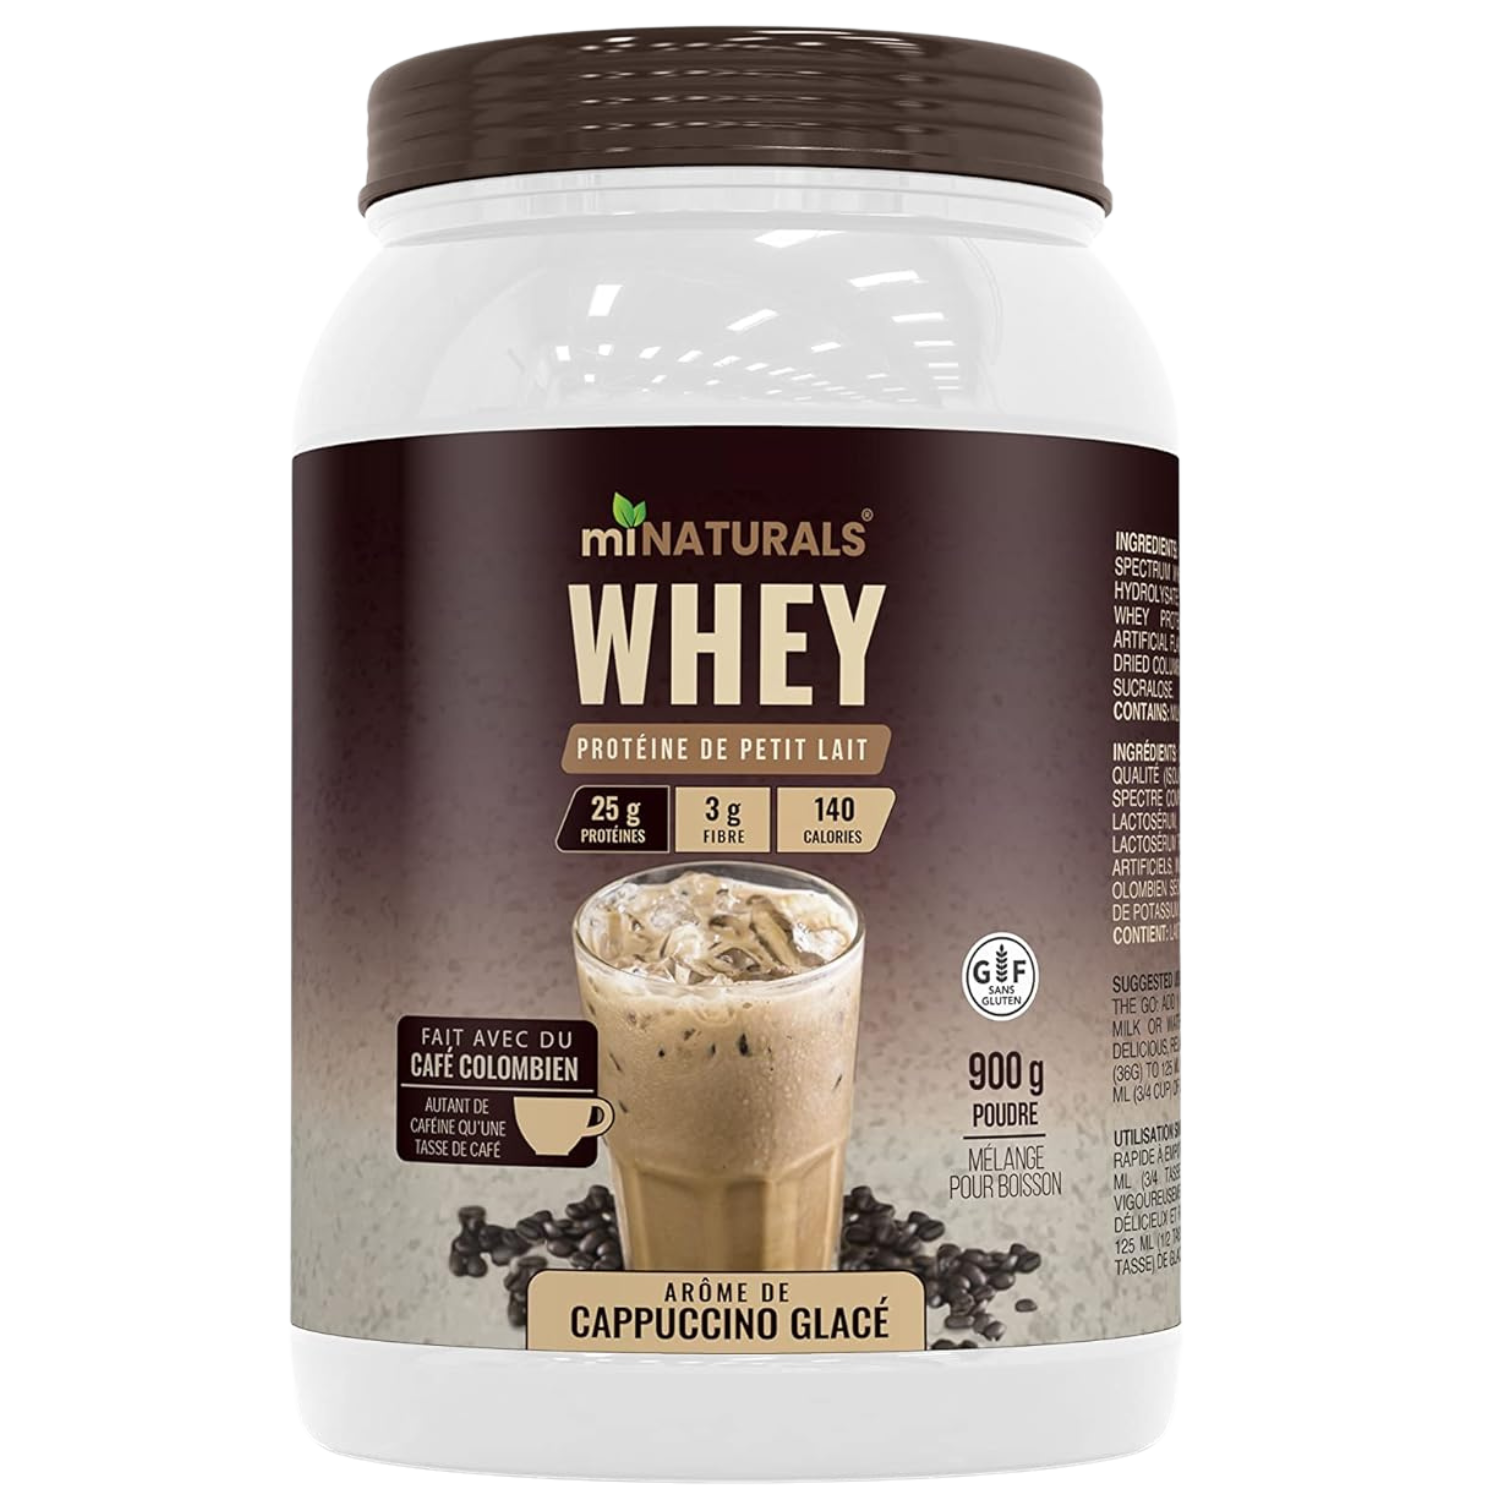 Whey Pure Isolate High Protein Drink Mix Powder, For Shakes - Iced Cappuccino Coffee (900g)